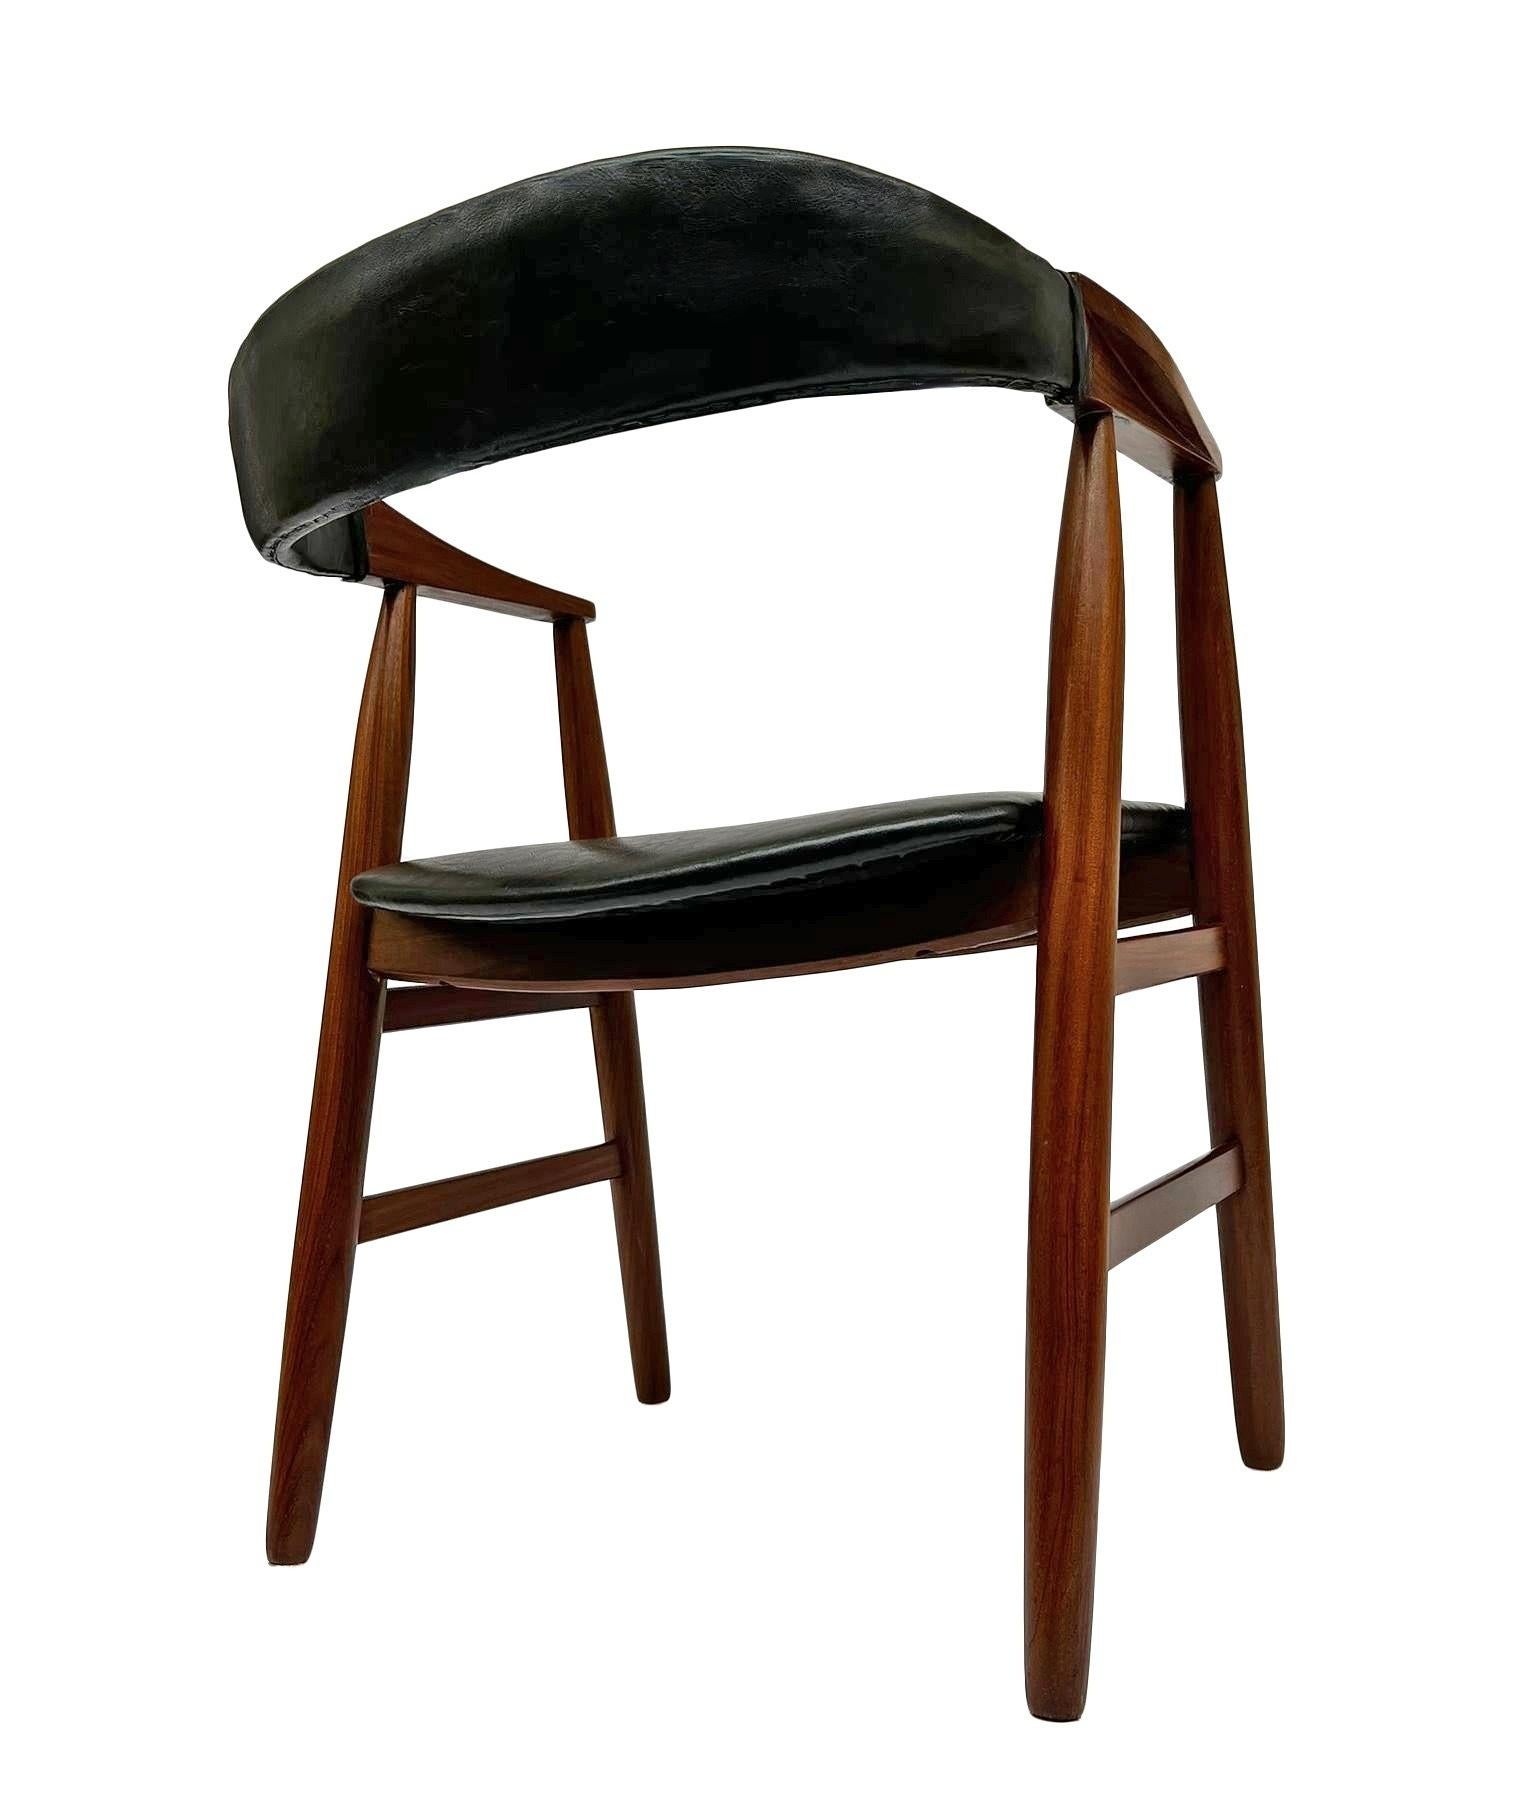 A beautiful Danish teak and black vinyl Model 213 desk chair designed by Thomas Harlev for Farstrup Mobler, this would make a stylish addition to any living or work area.

The chair has a wide seat and wooden sculptured armrests for enhanced